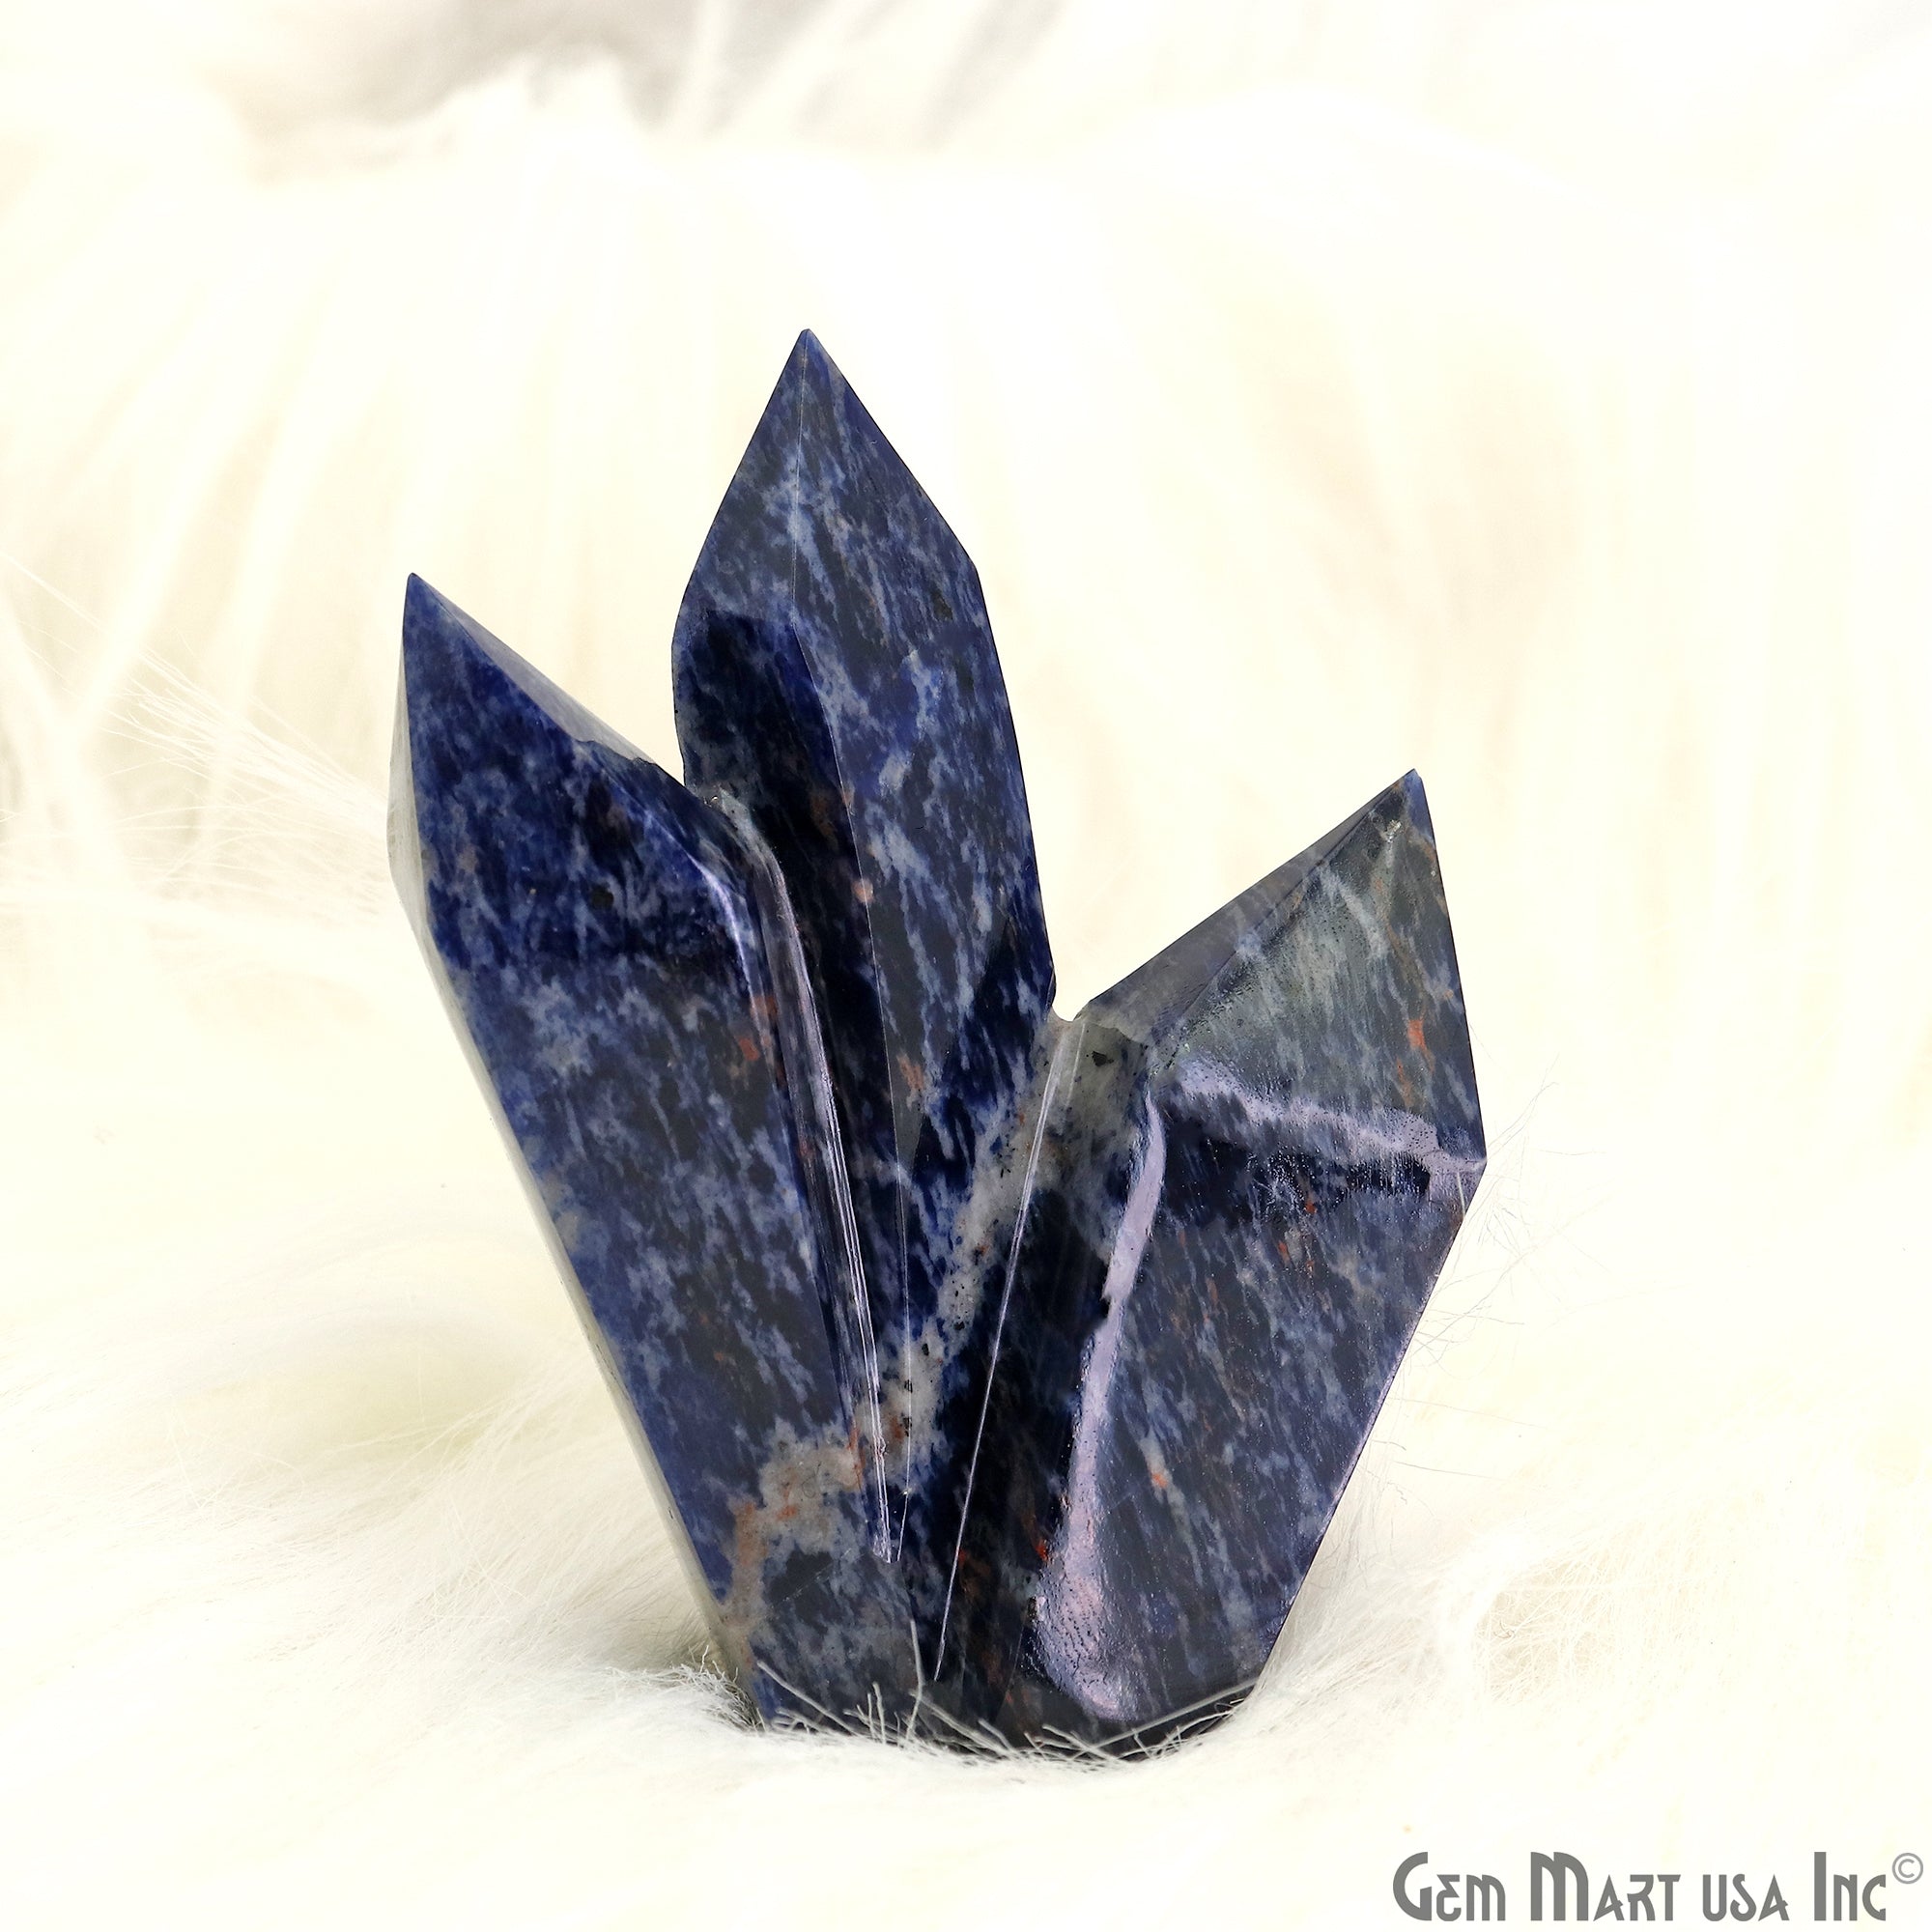 Sodalite Crystal Cluster, Terminated Crystal Rock Cluster Family, Mineral Specimen, Home Decor, Spiritual Gift 2-3Inch Appx